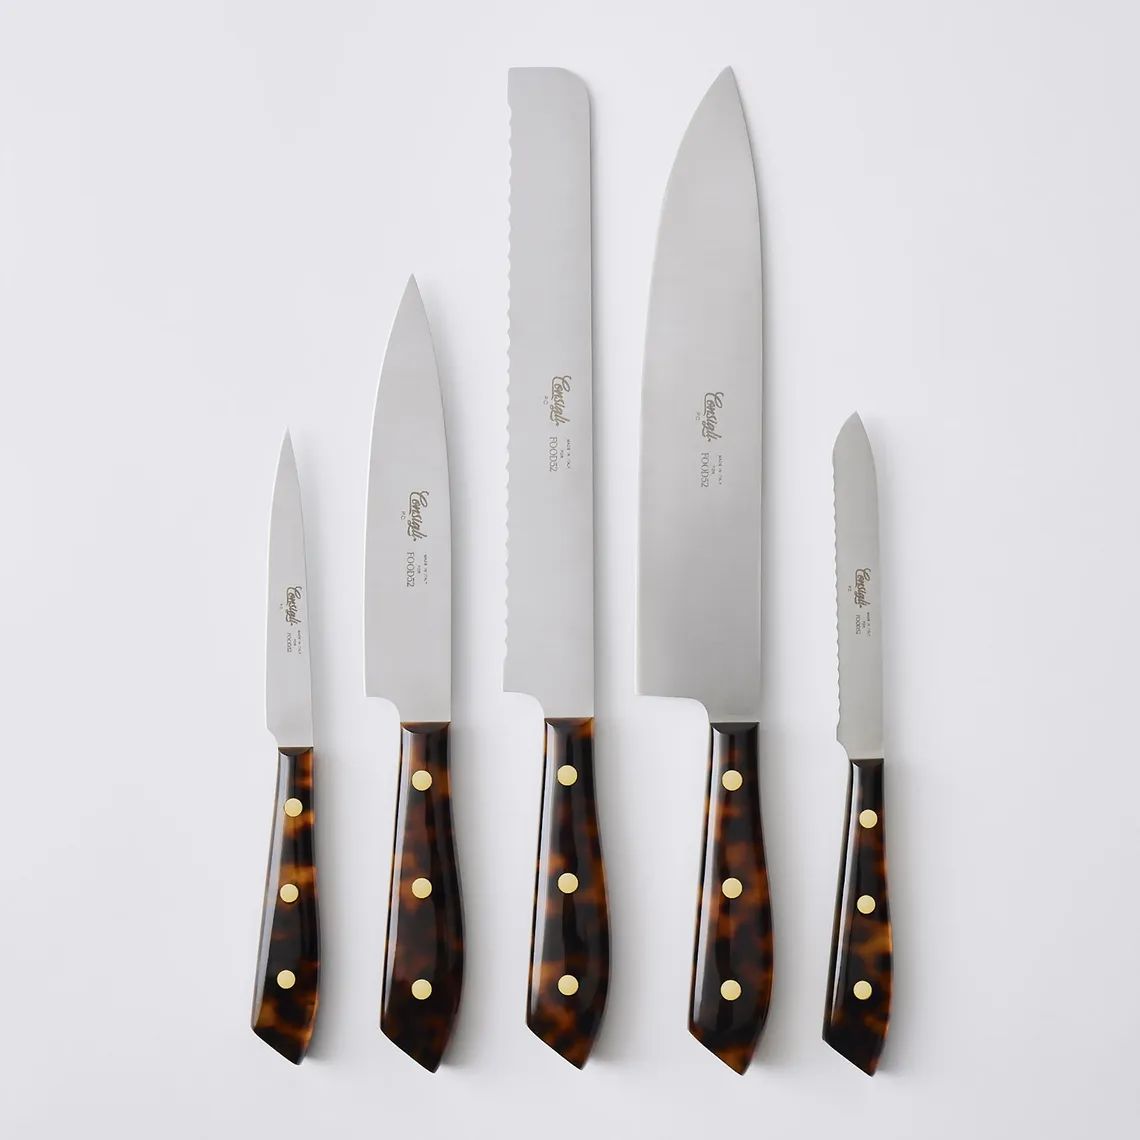 Consigli for Food52 Italian Handcrafted Kitchen Knives | Food52